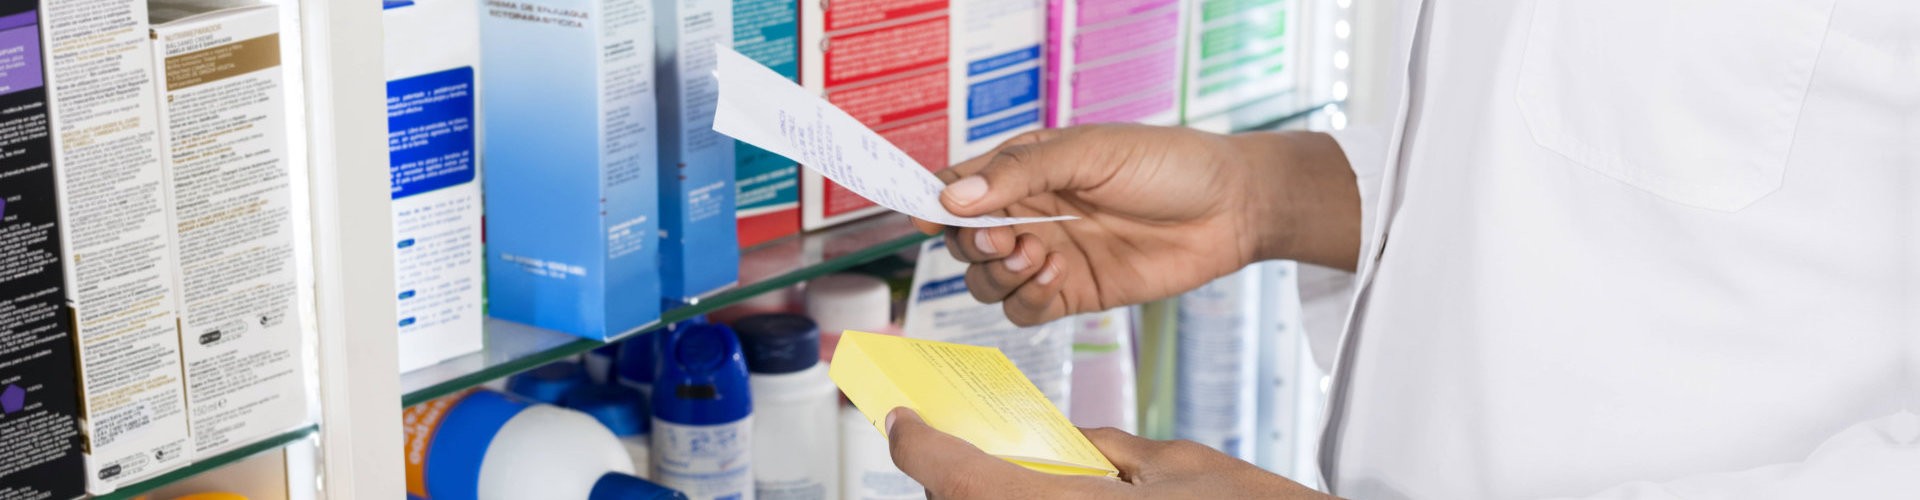 crop image of a pharmacist holding a prescription